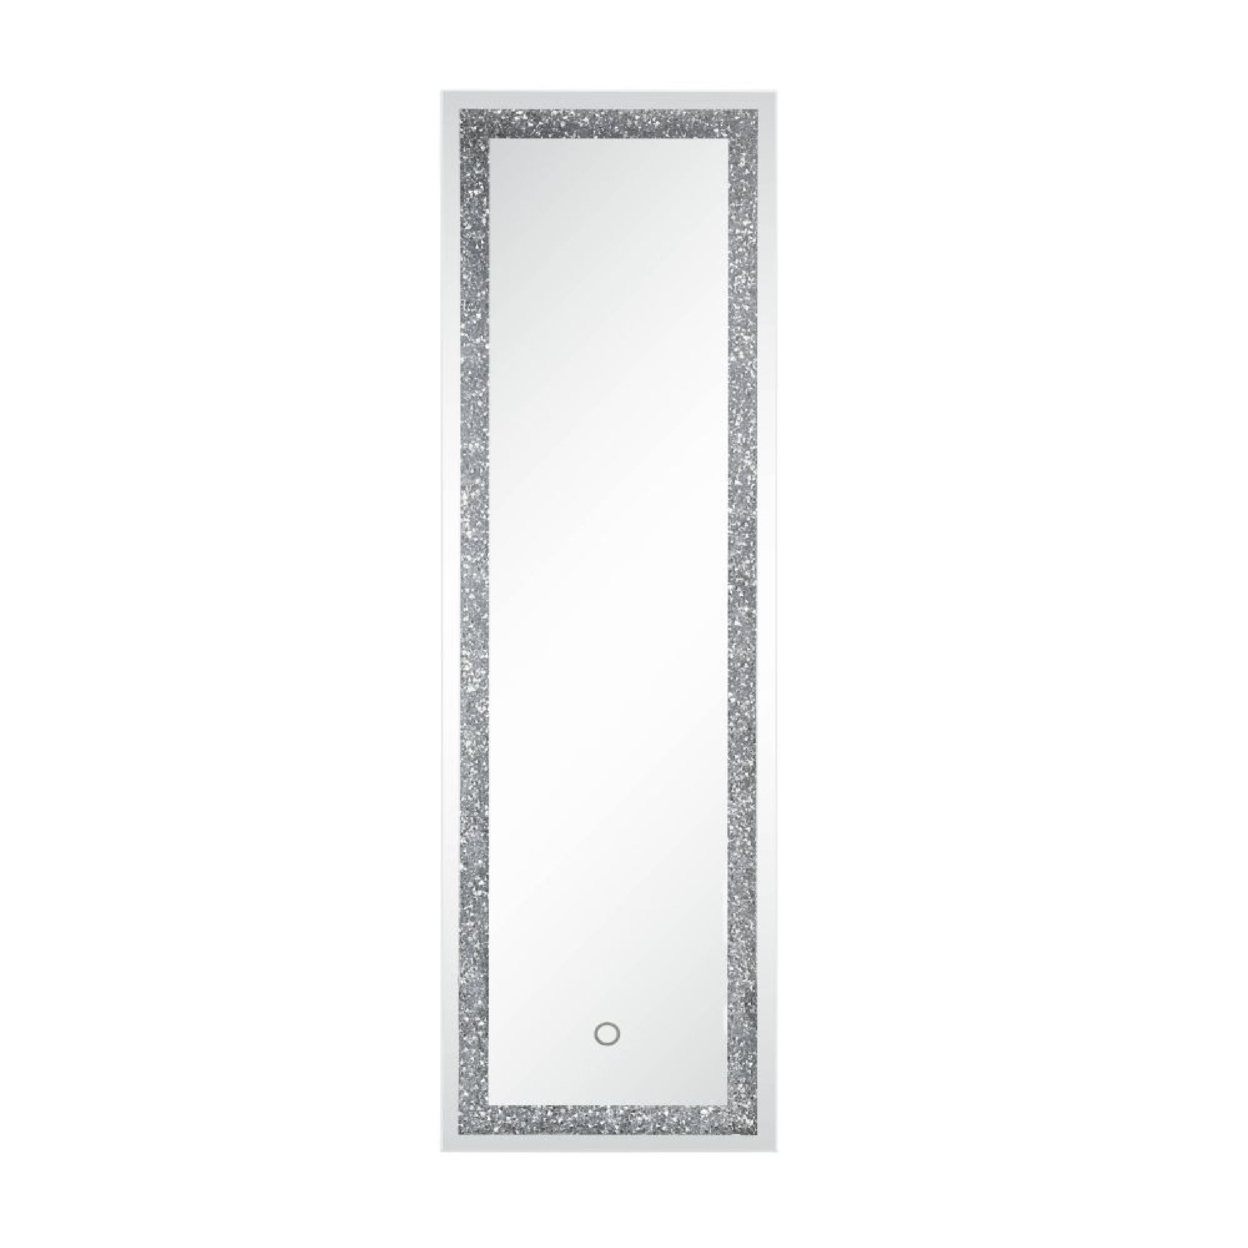 Floor Mirror With LED Light And Faux Diamonds Inlay, Silver- Saltoro Sherpi